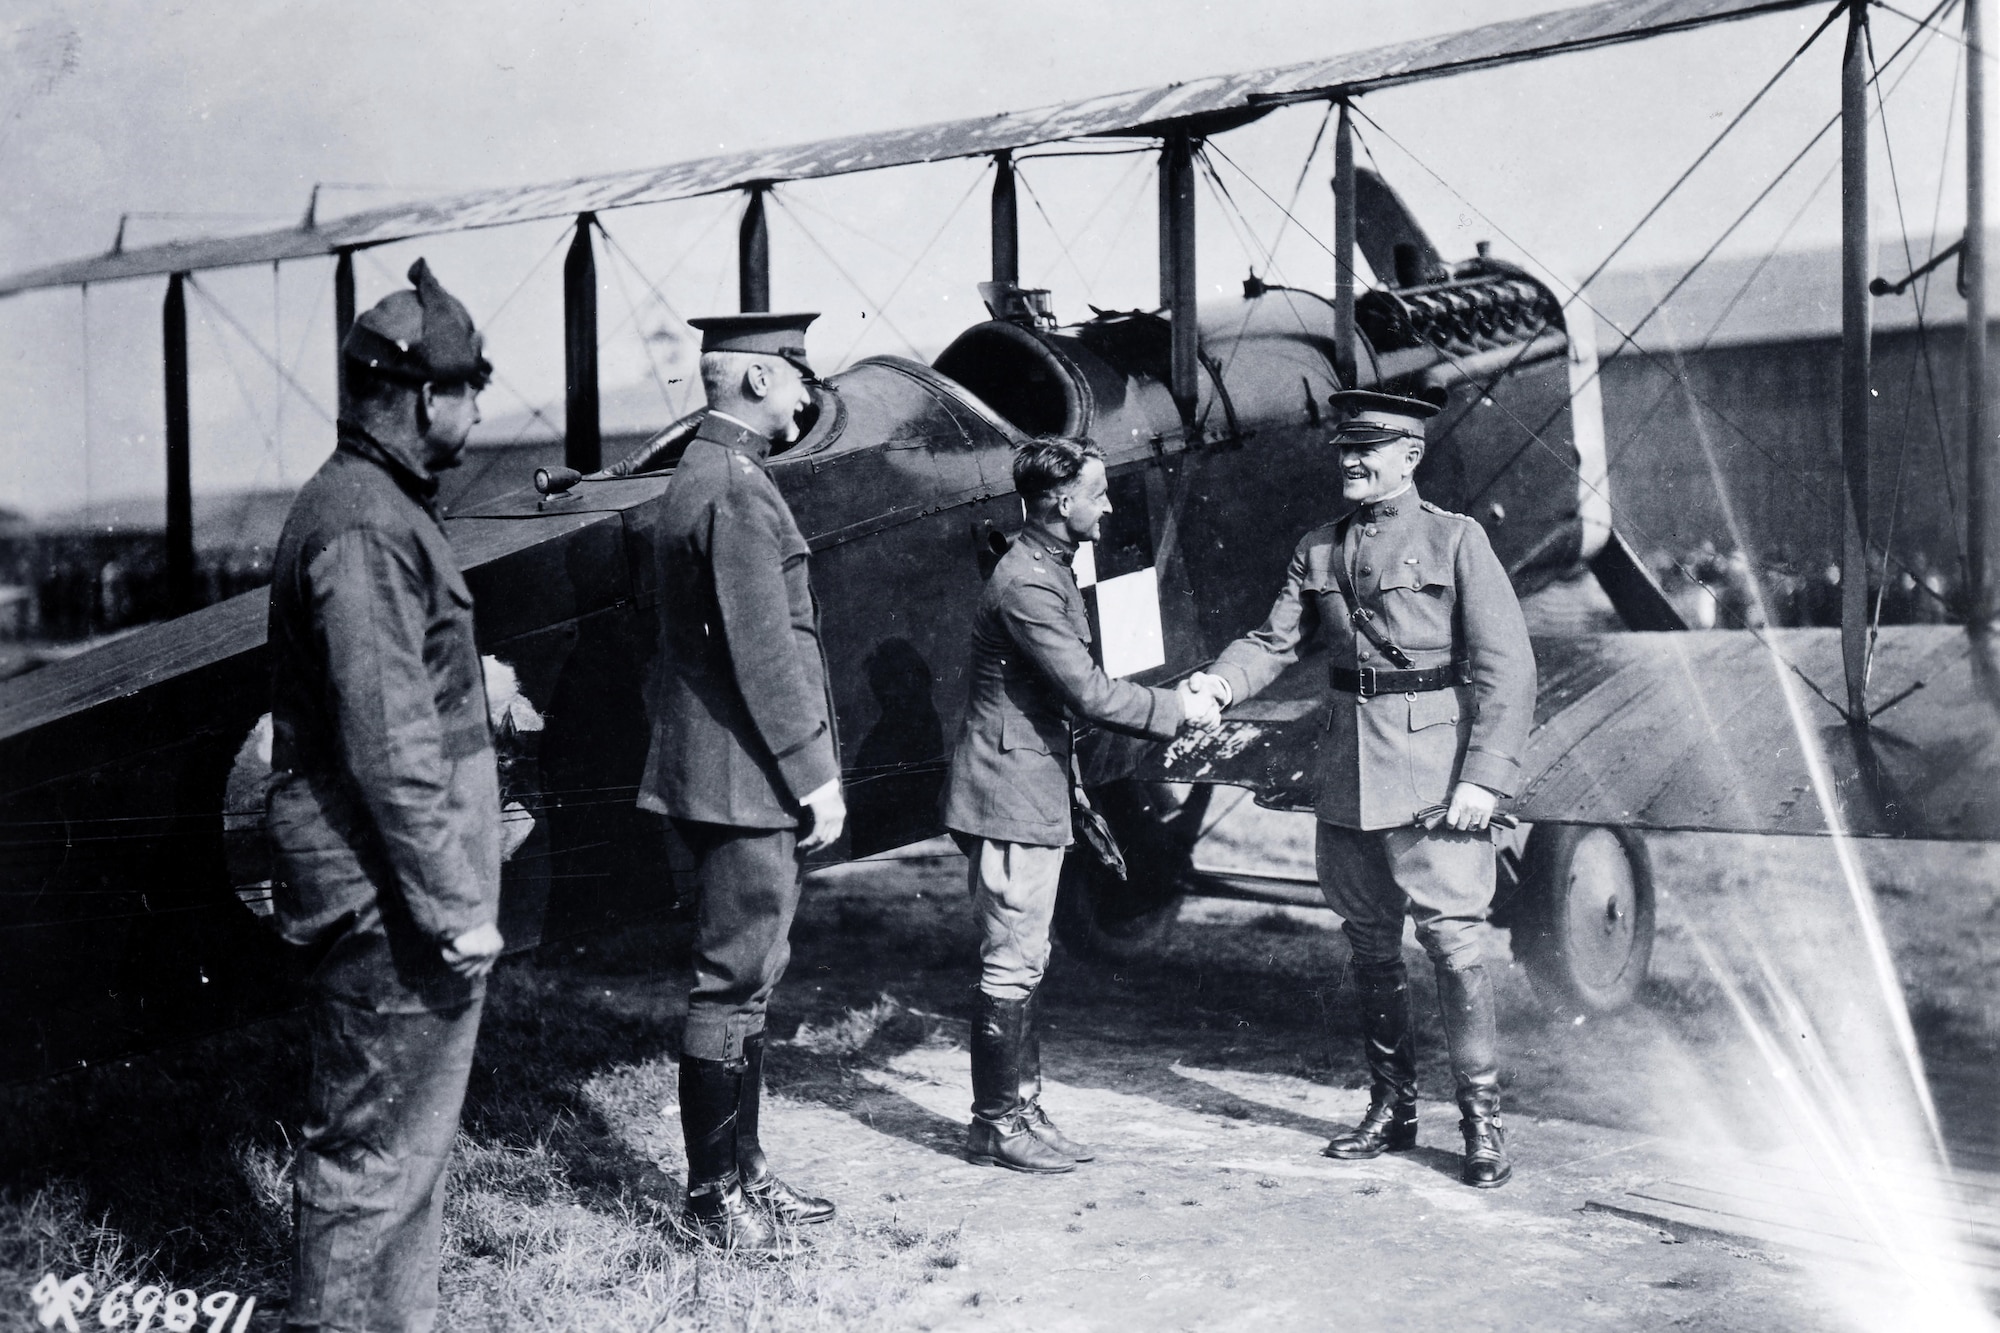 The pioneering 1920 Alaska Flight was an incredible feat of airmanship.  Air Service aircrews flew four DH-4Bs a total of 9,000 miles without loss of personnel or aircraft.  Here General Pershing congratulates Capt St. Clair Streett, the flight commander, upon his safe return.